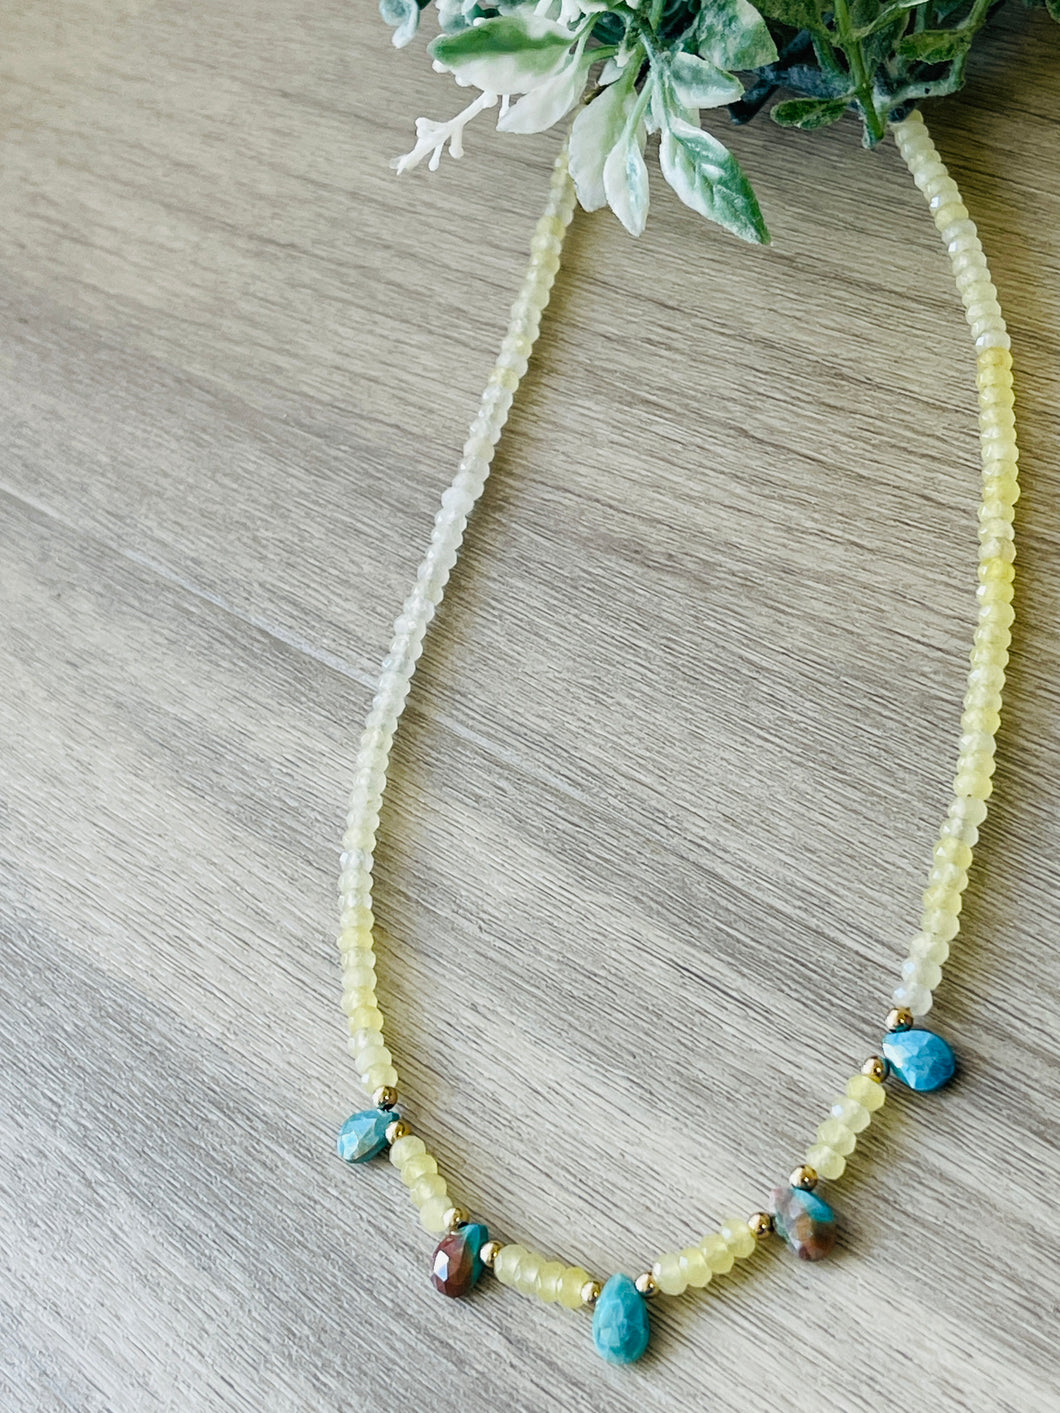 Yellow Jade with Turquoise necklace